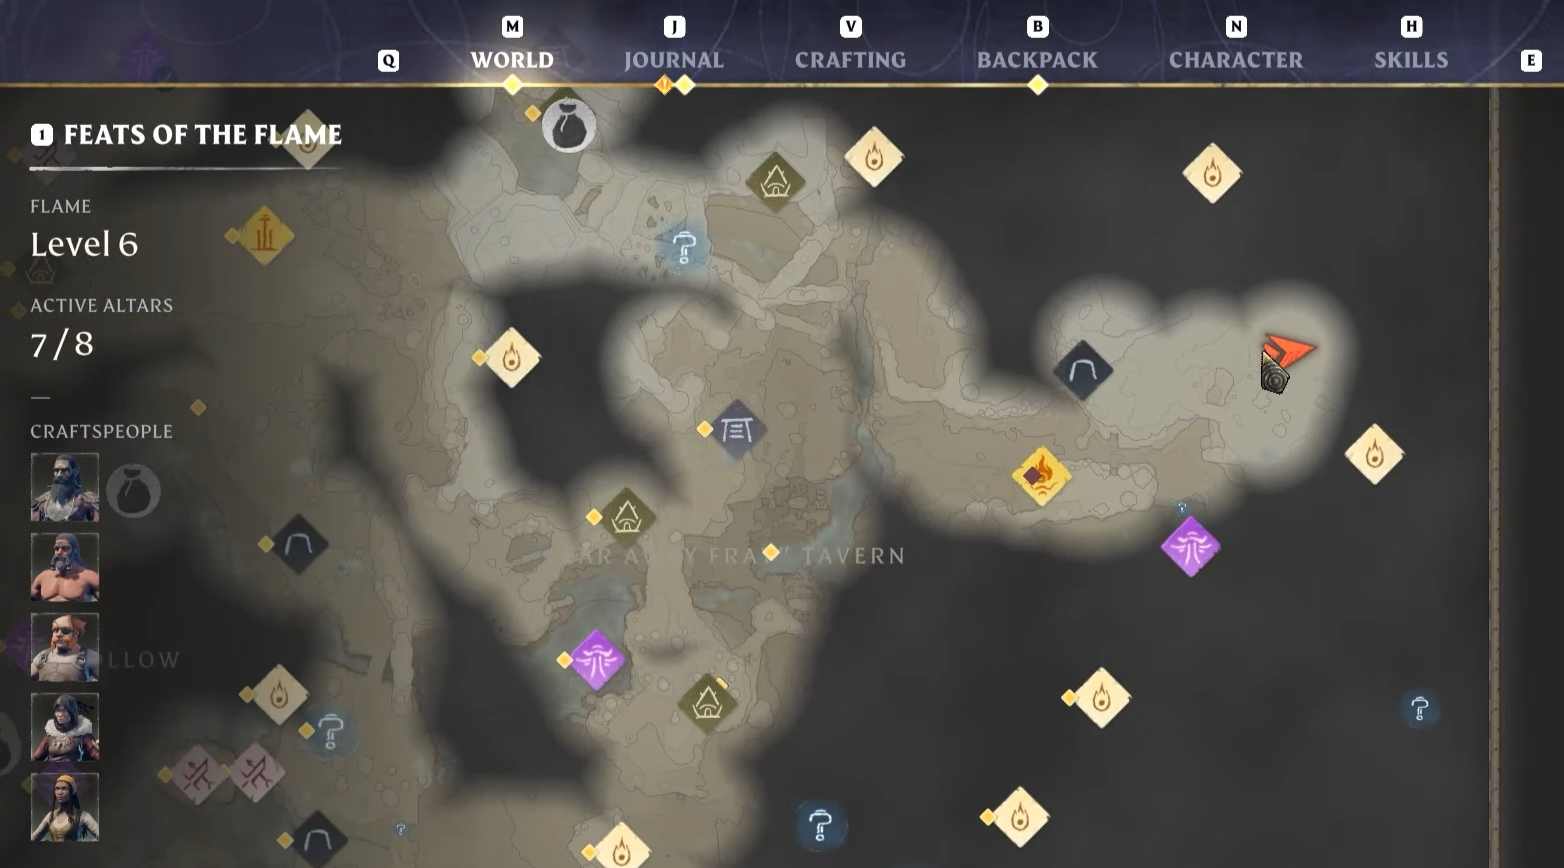 Image of the map in Enshrouded showing the location of the East Lapis Town.